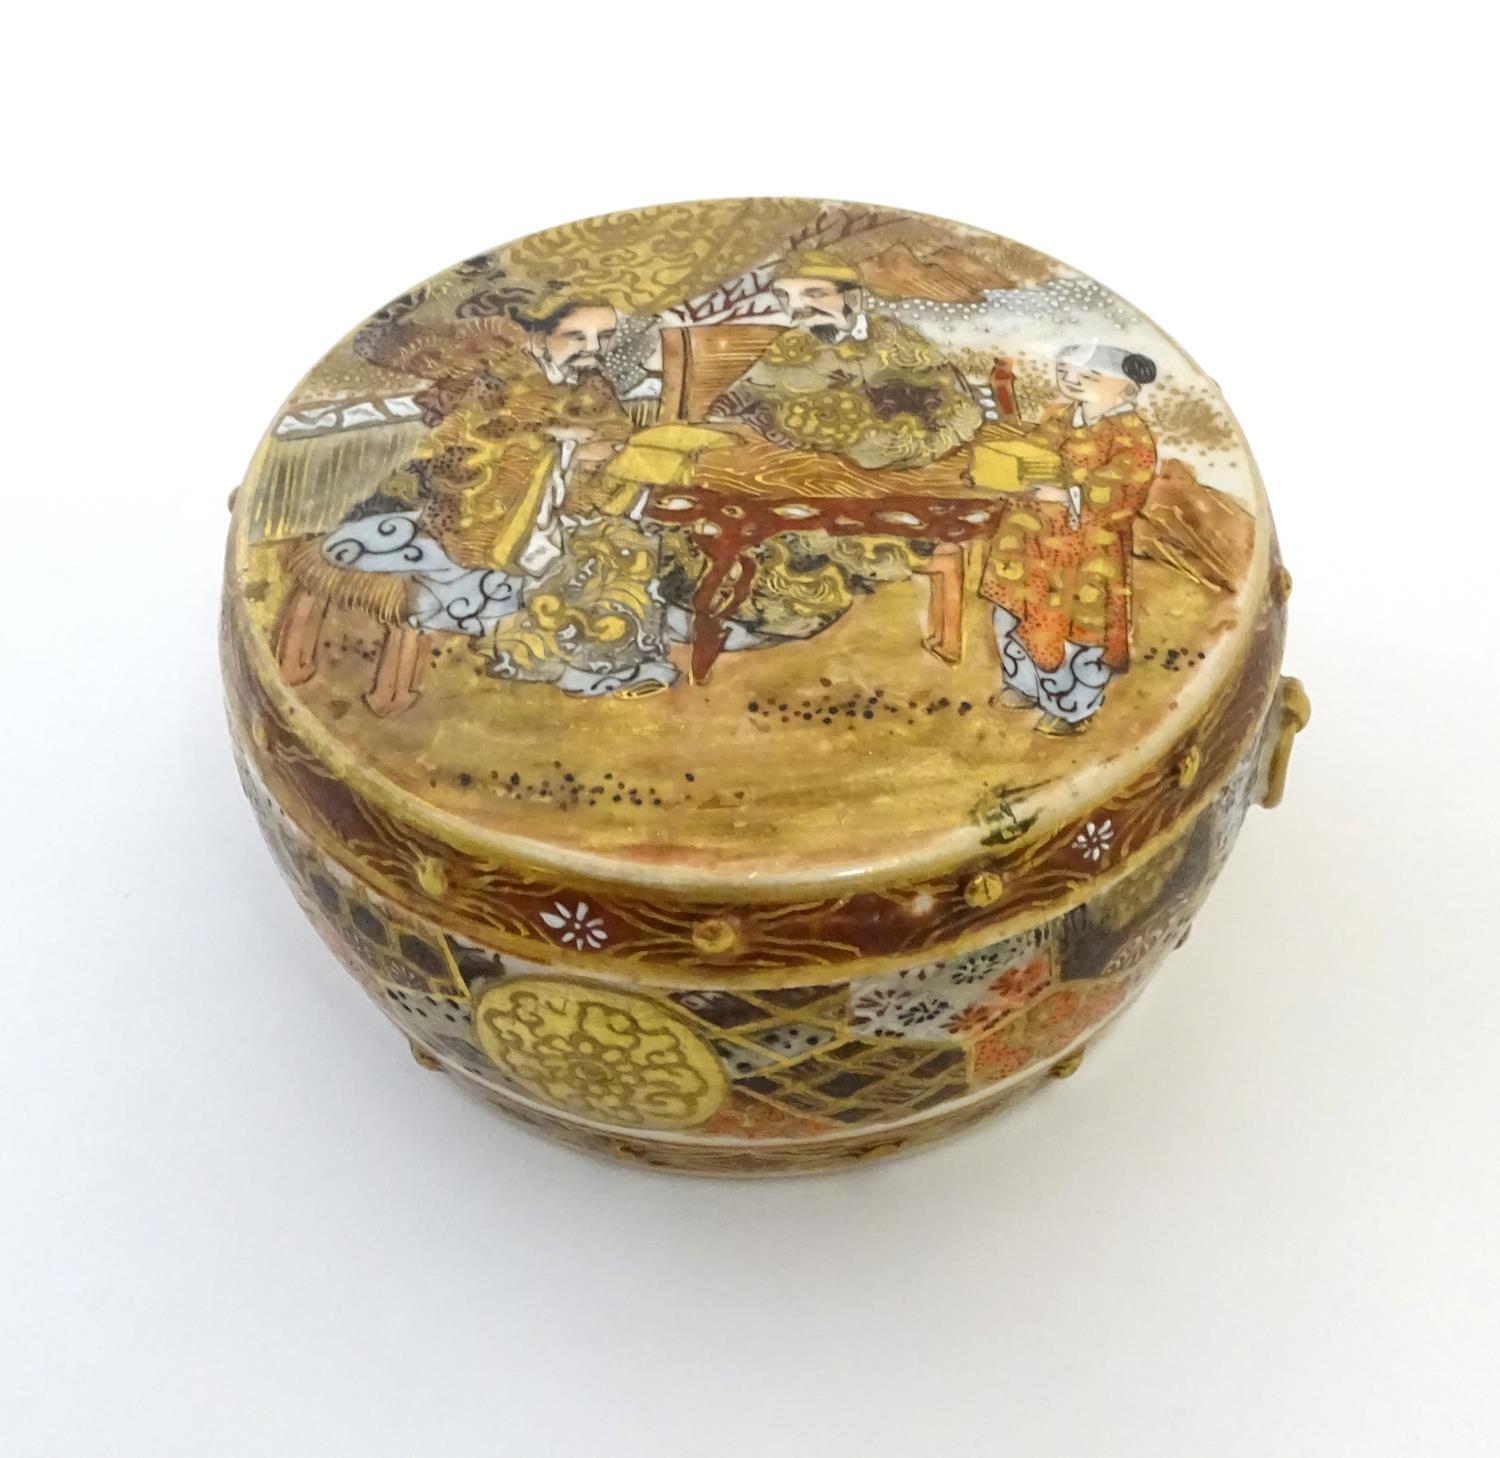 A Japanese Satsuma pot and cover. The cover decorated with a landscape scene with two scholar